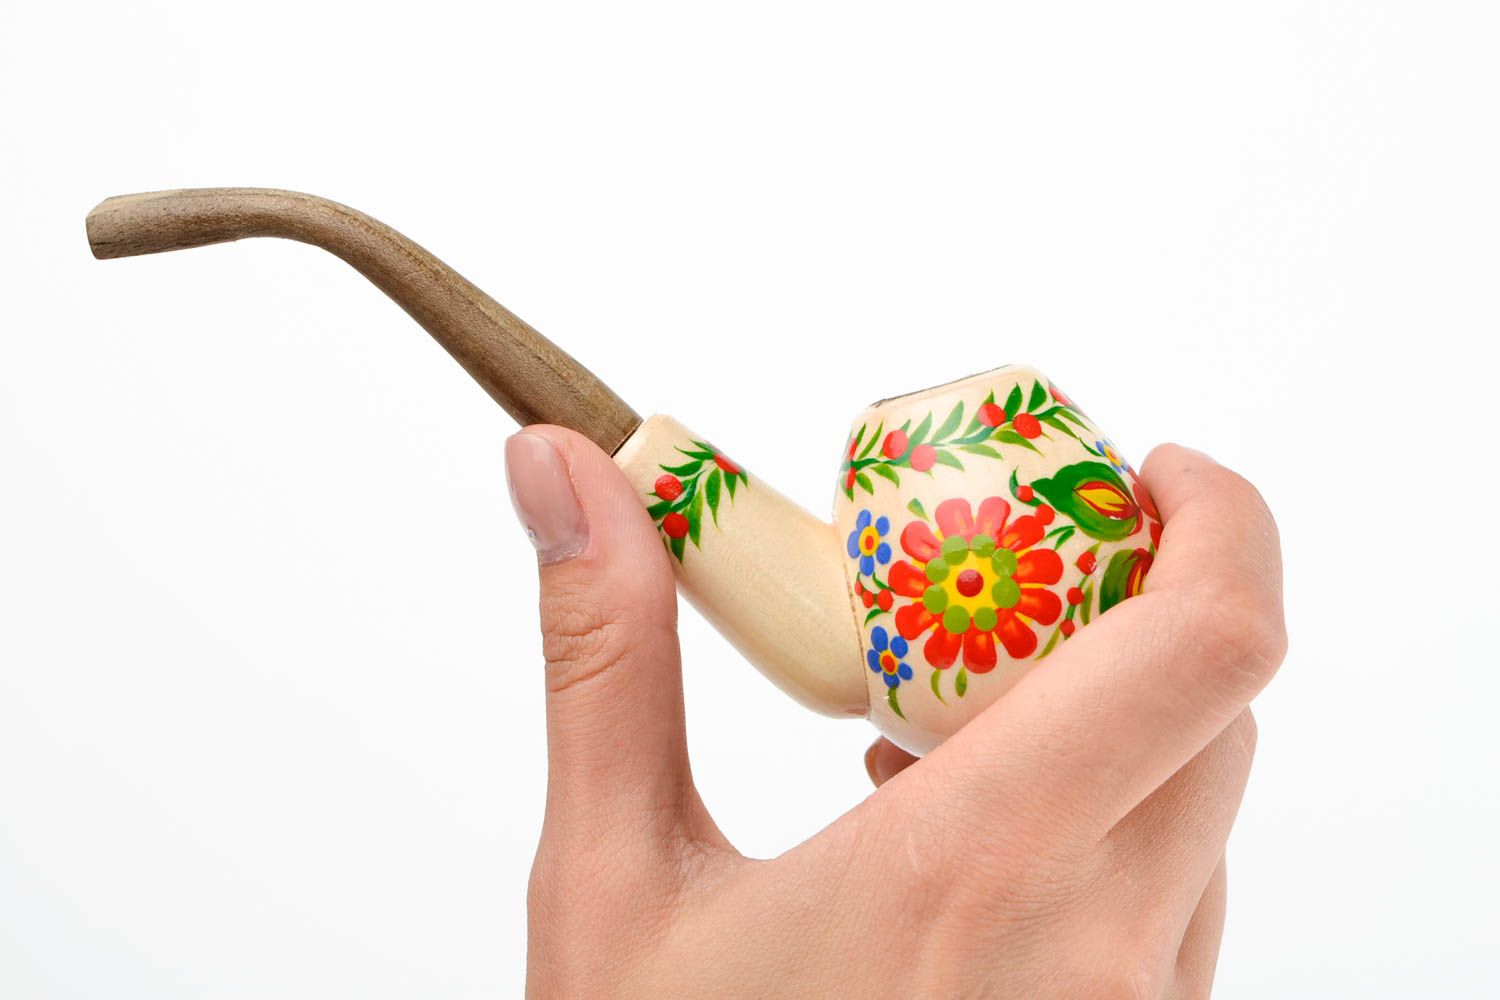 Handmade pipe for smoking wooden smoking pipe decorative use only interior decor photo 2